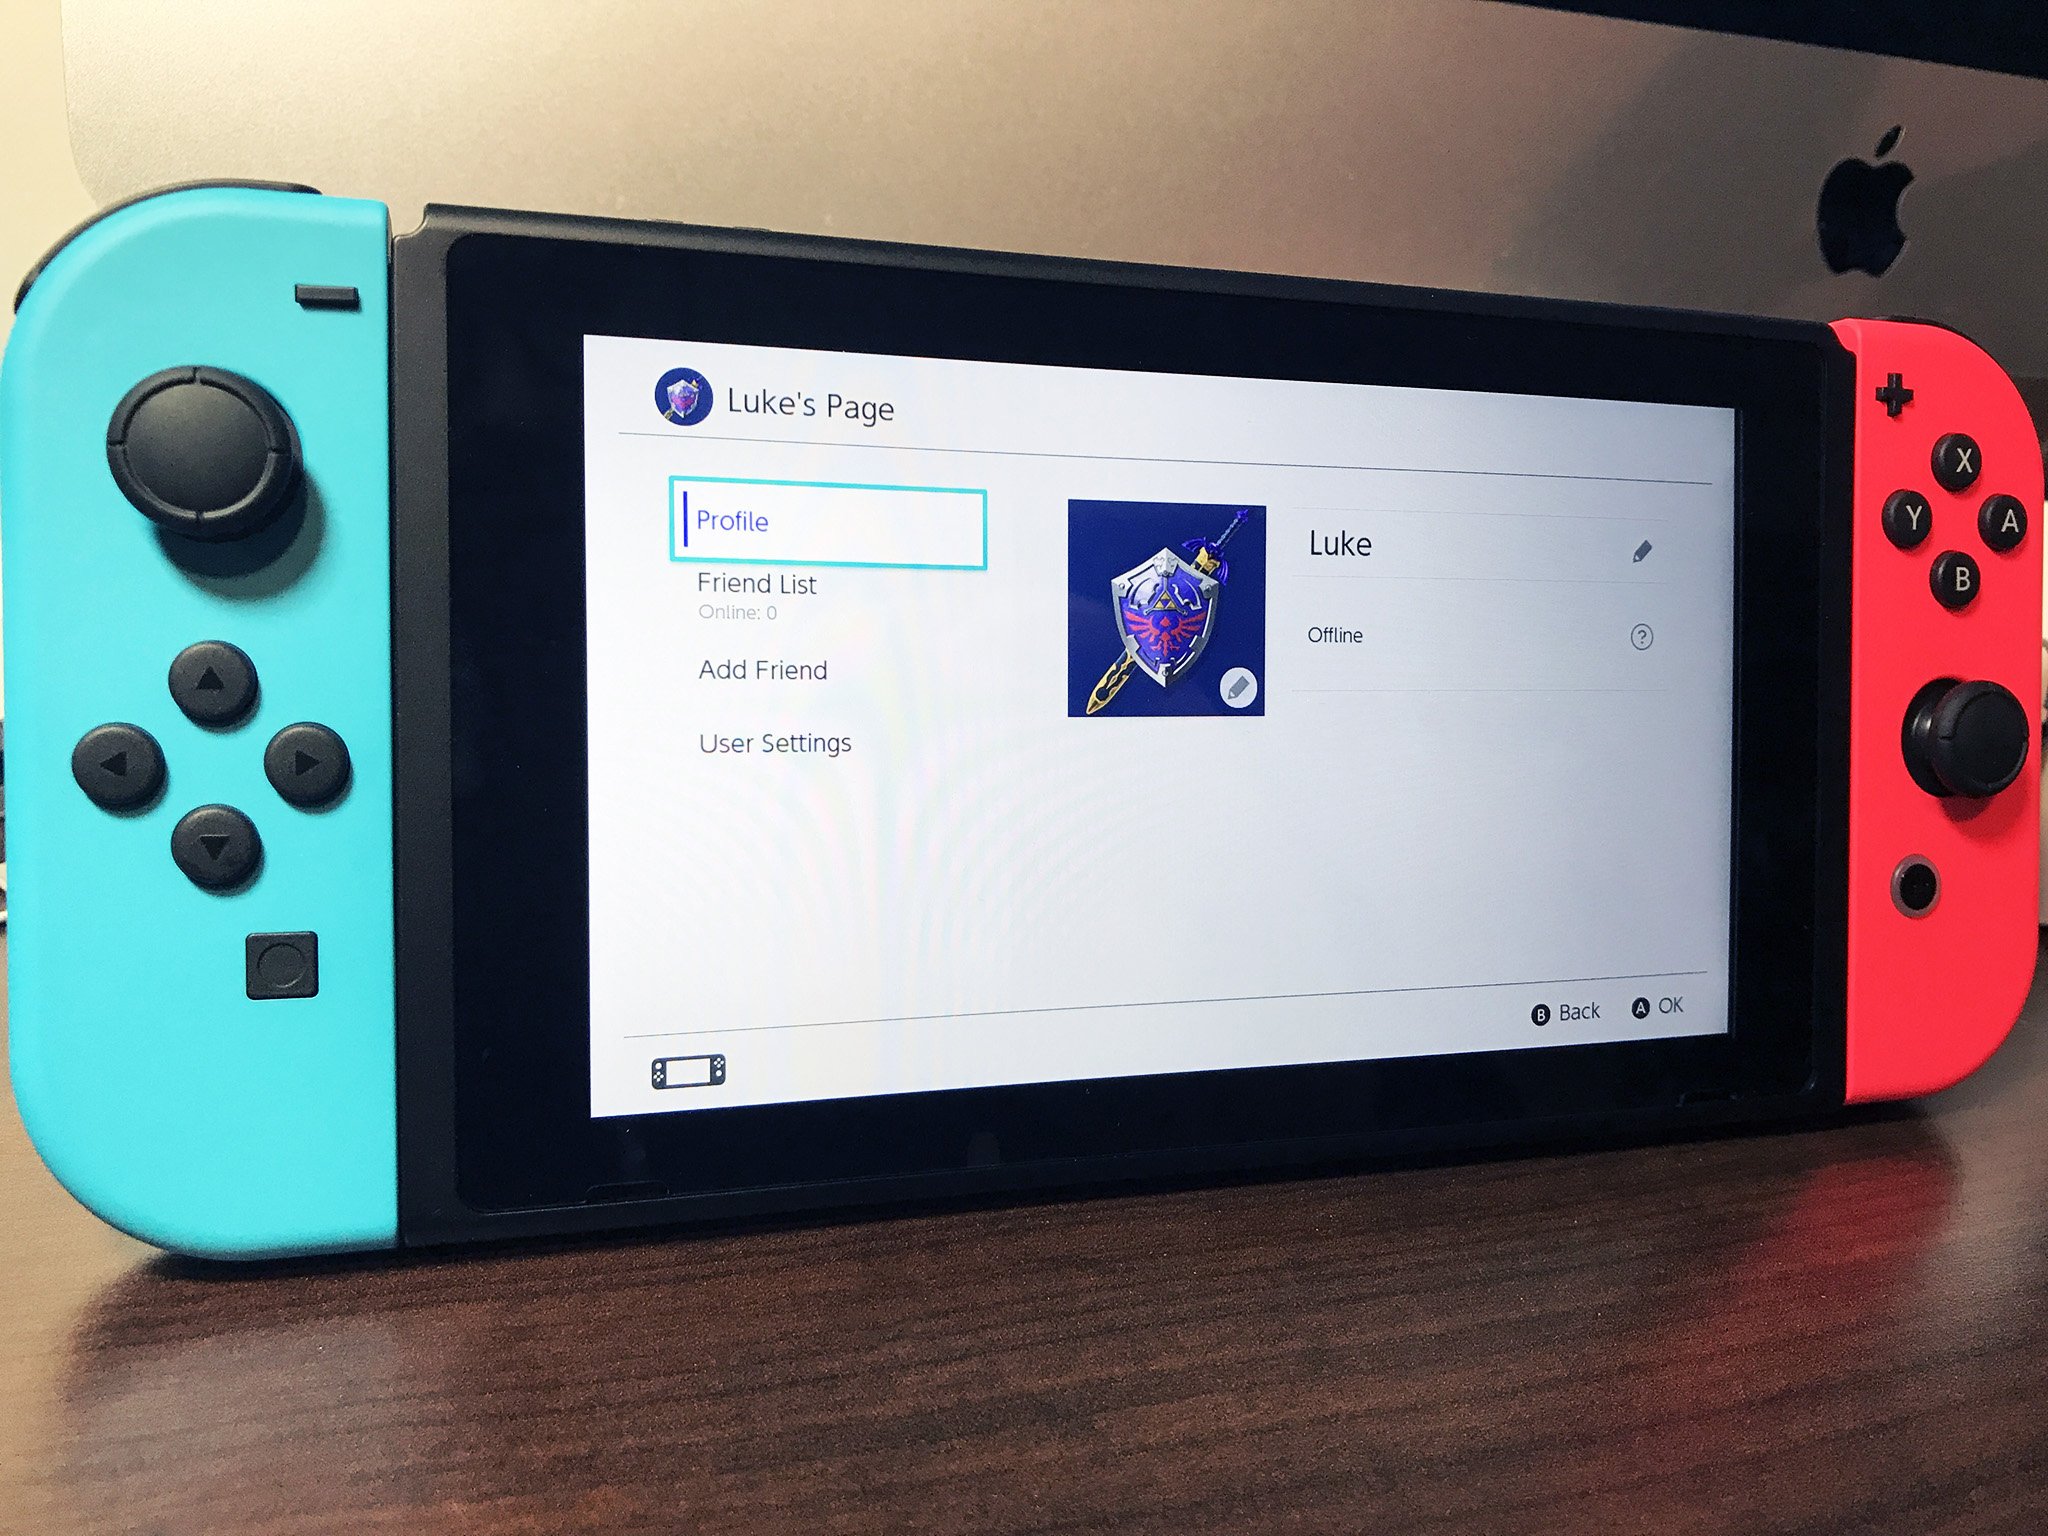 How To Delete A User Profile On Nintendo Switch Imore - there could be any number of reasons why you would want to get rid of a user profile on your nintendo switch maybe you created a temporary one for your